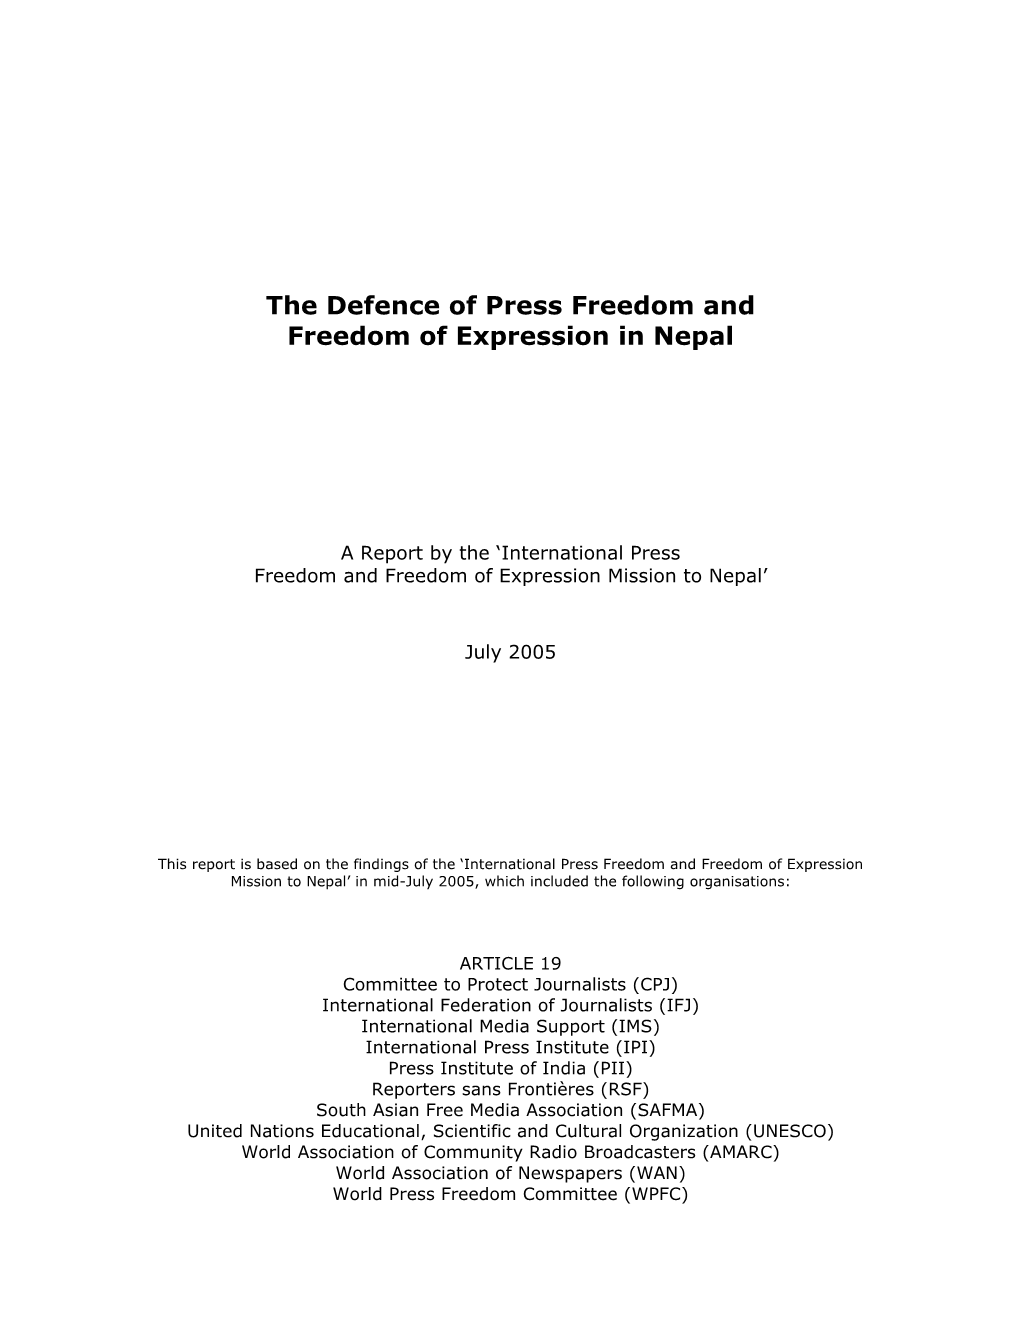 The Defence of Press Freedom and Freedom of Expression in Nepal